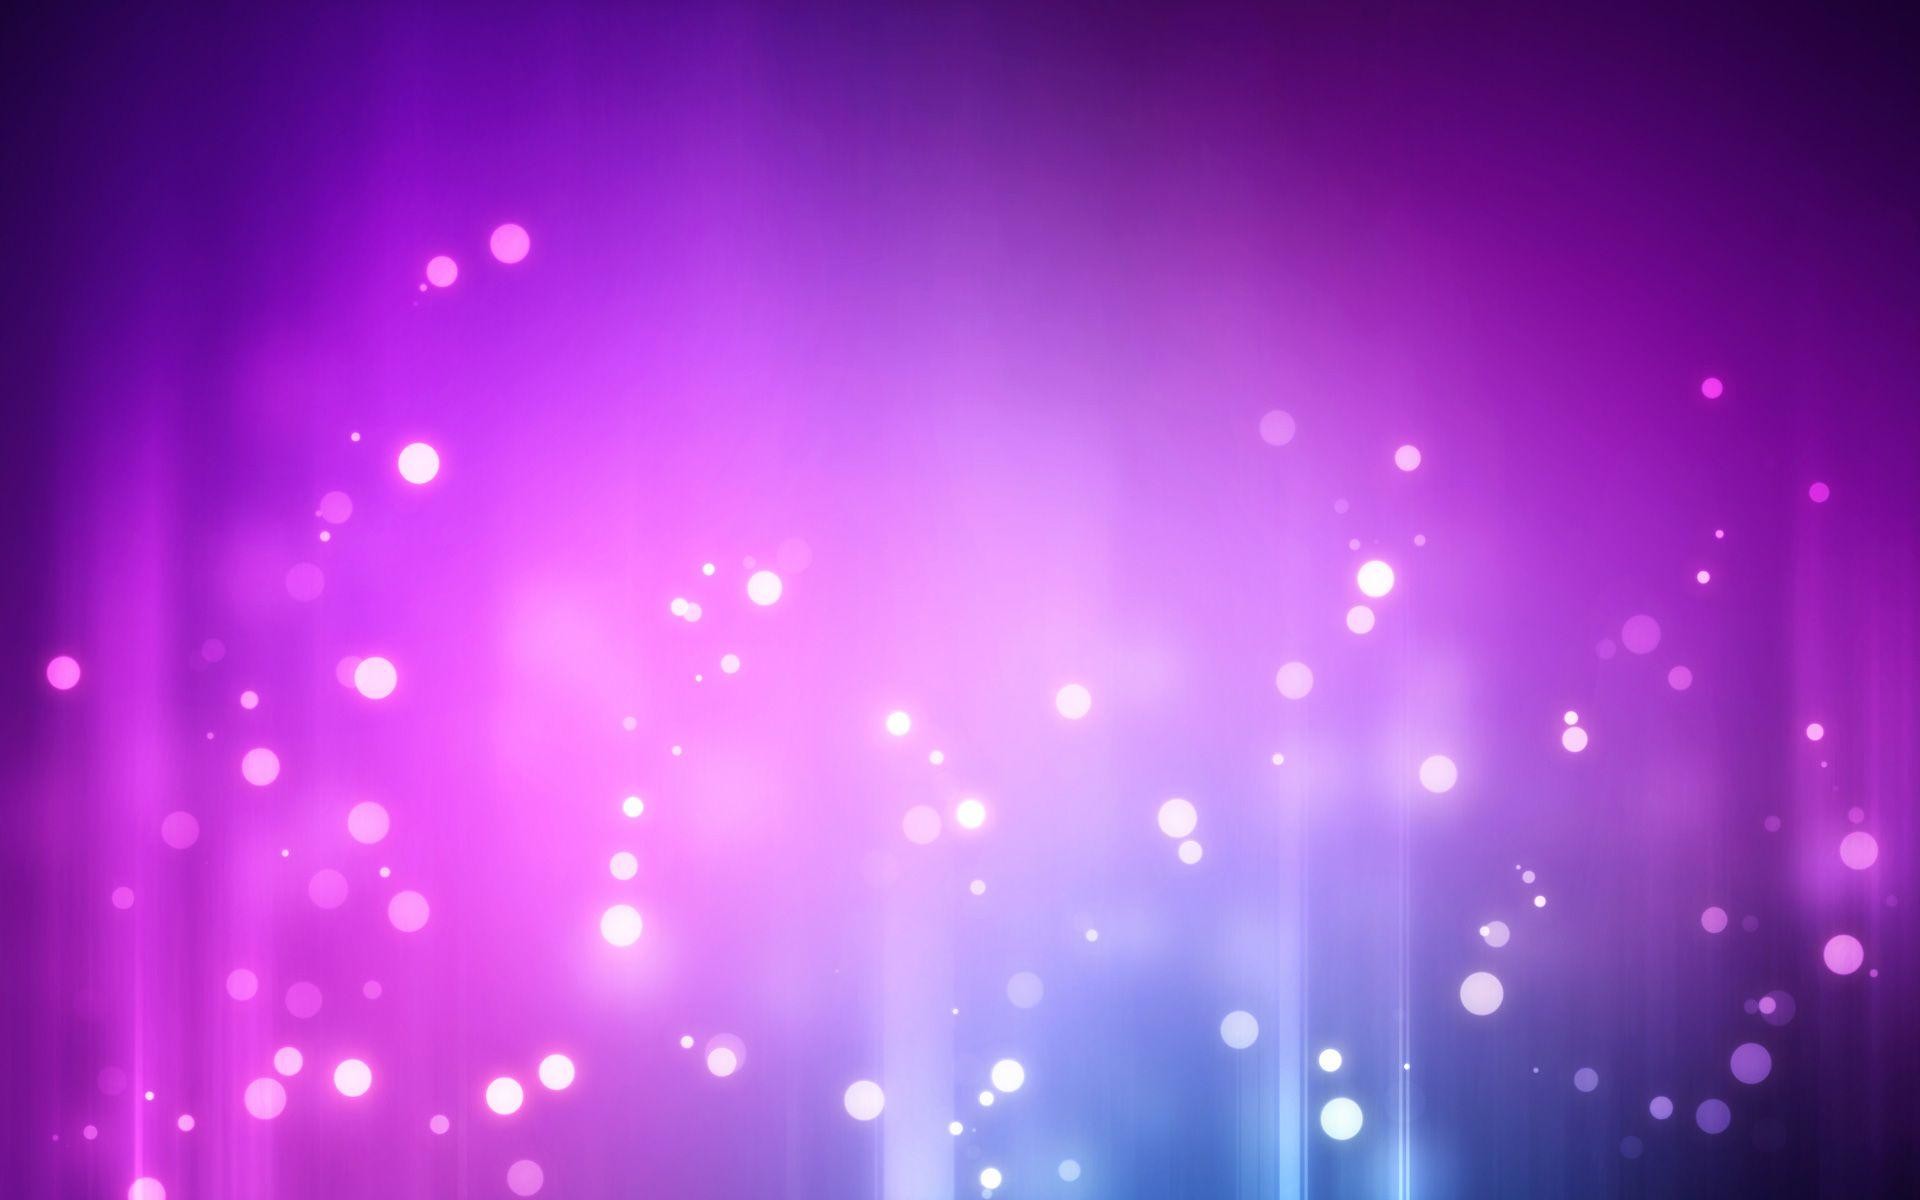 1920x1200 Wallpapers For > Cute Purple Backgrounds For Desktop